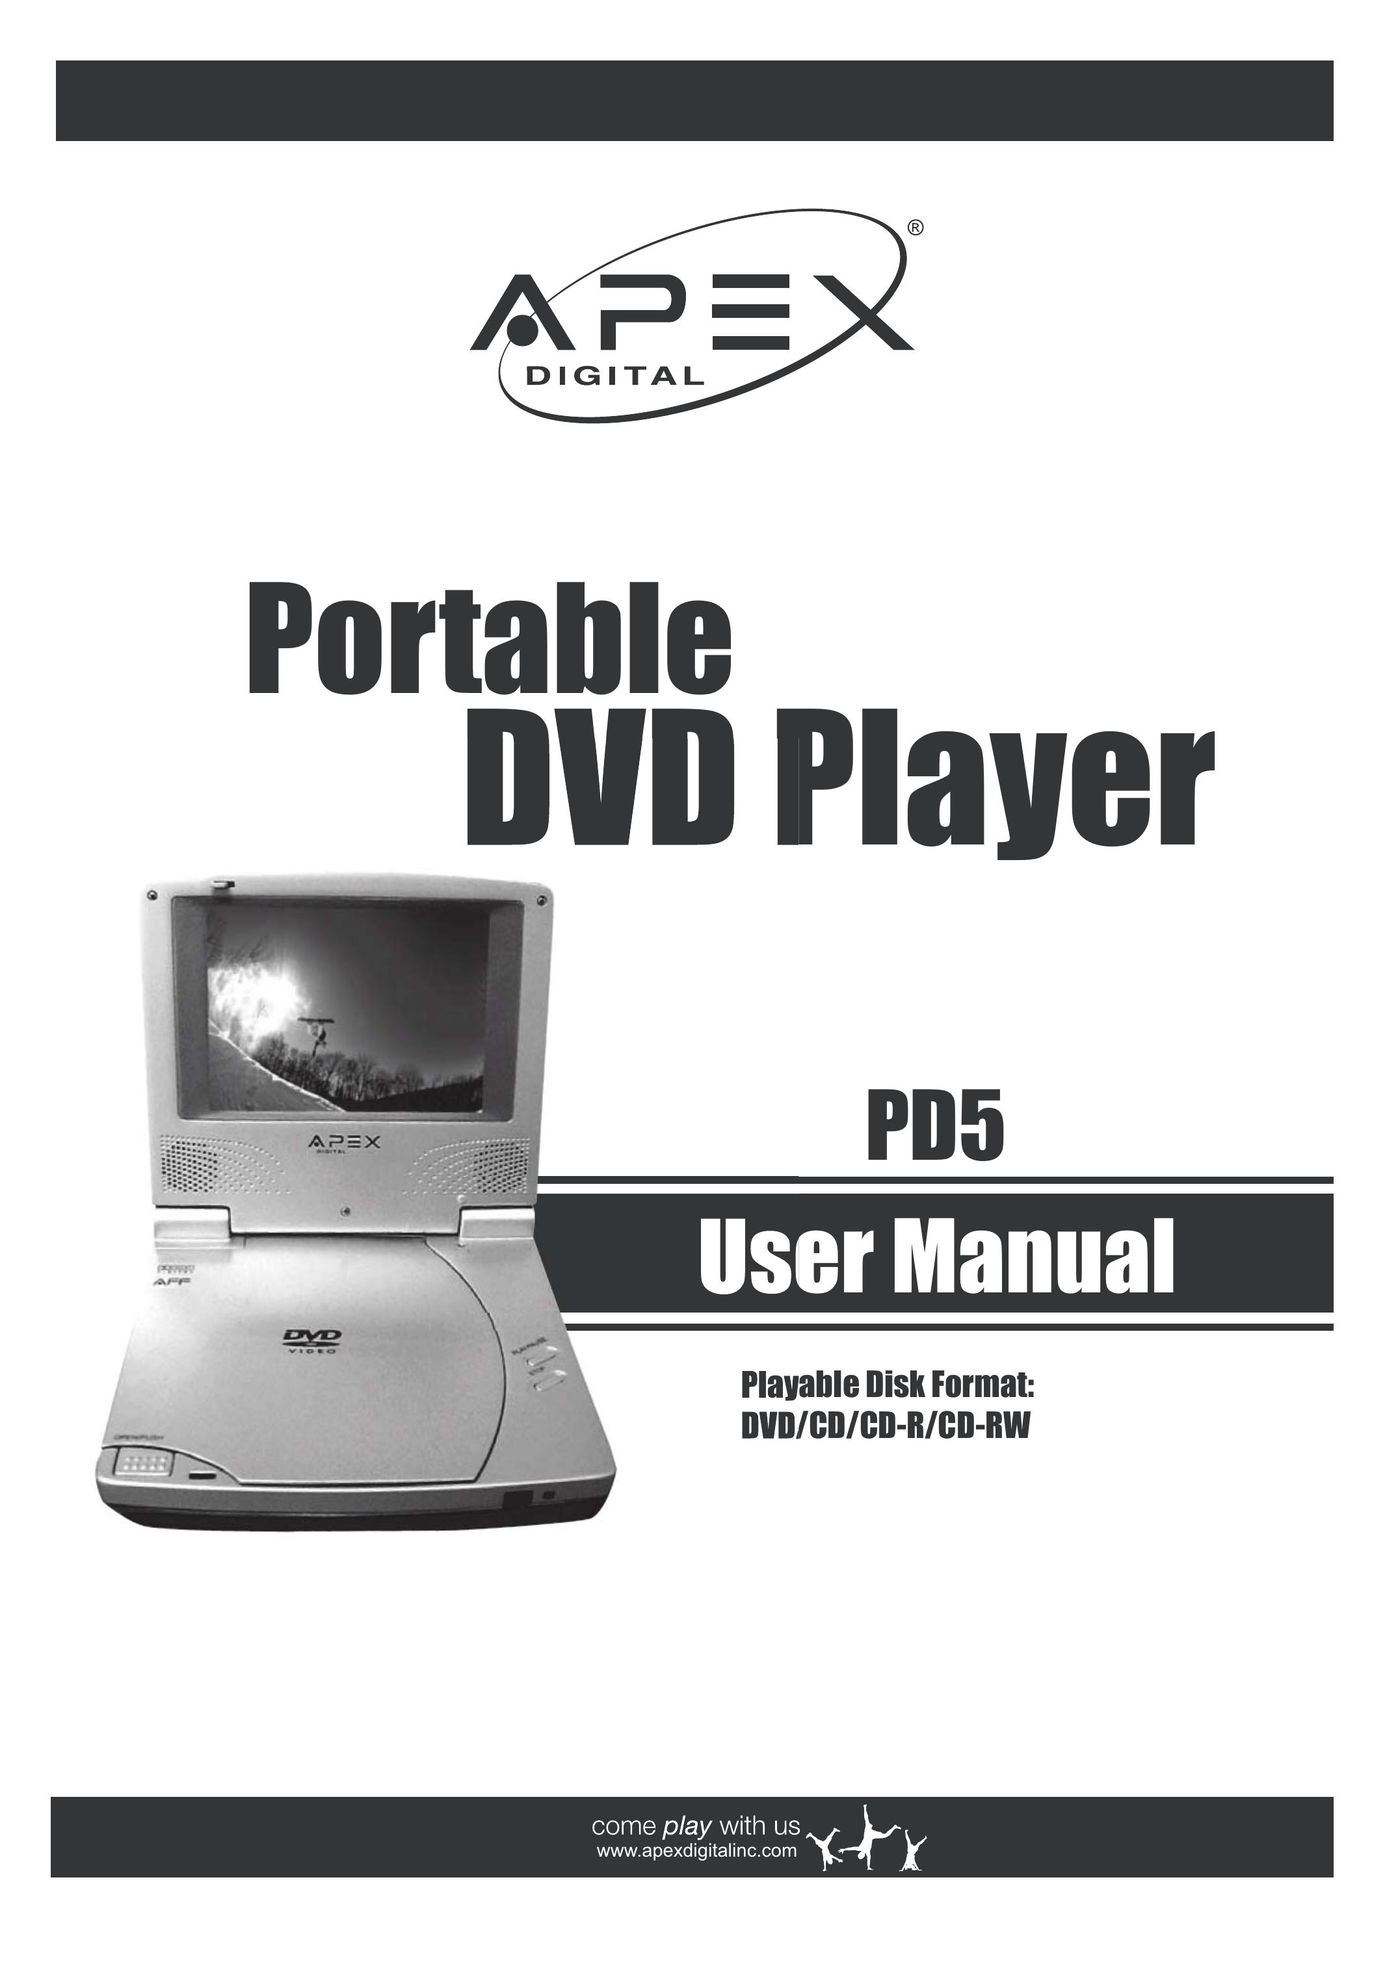 Apex Digital PD5 Portable DVD Player User Manual (Page 1)